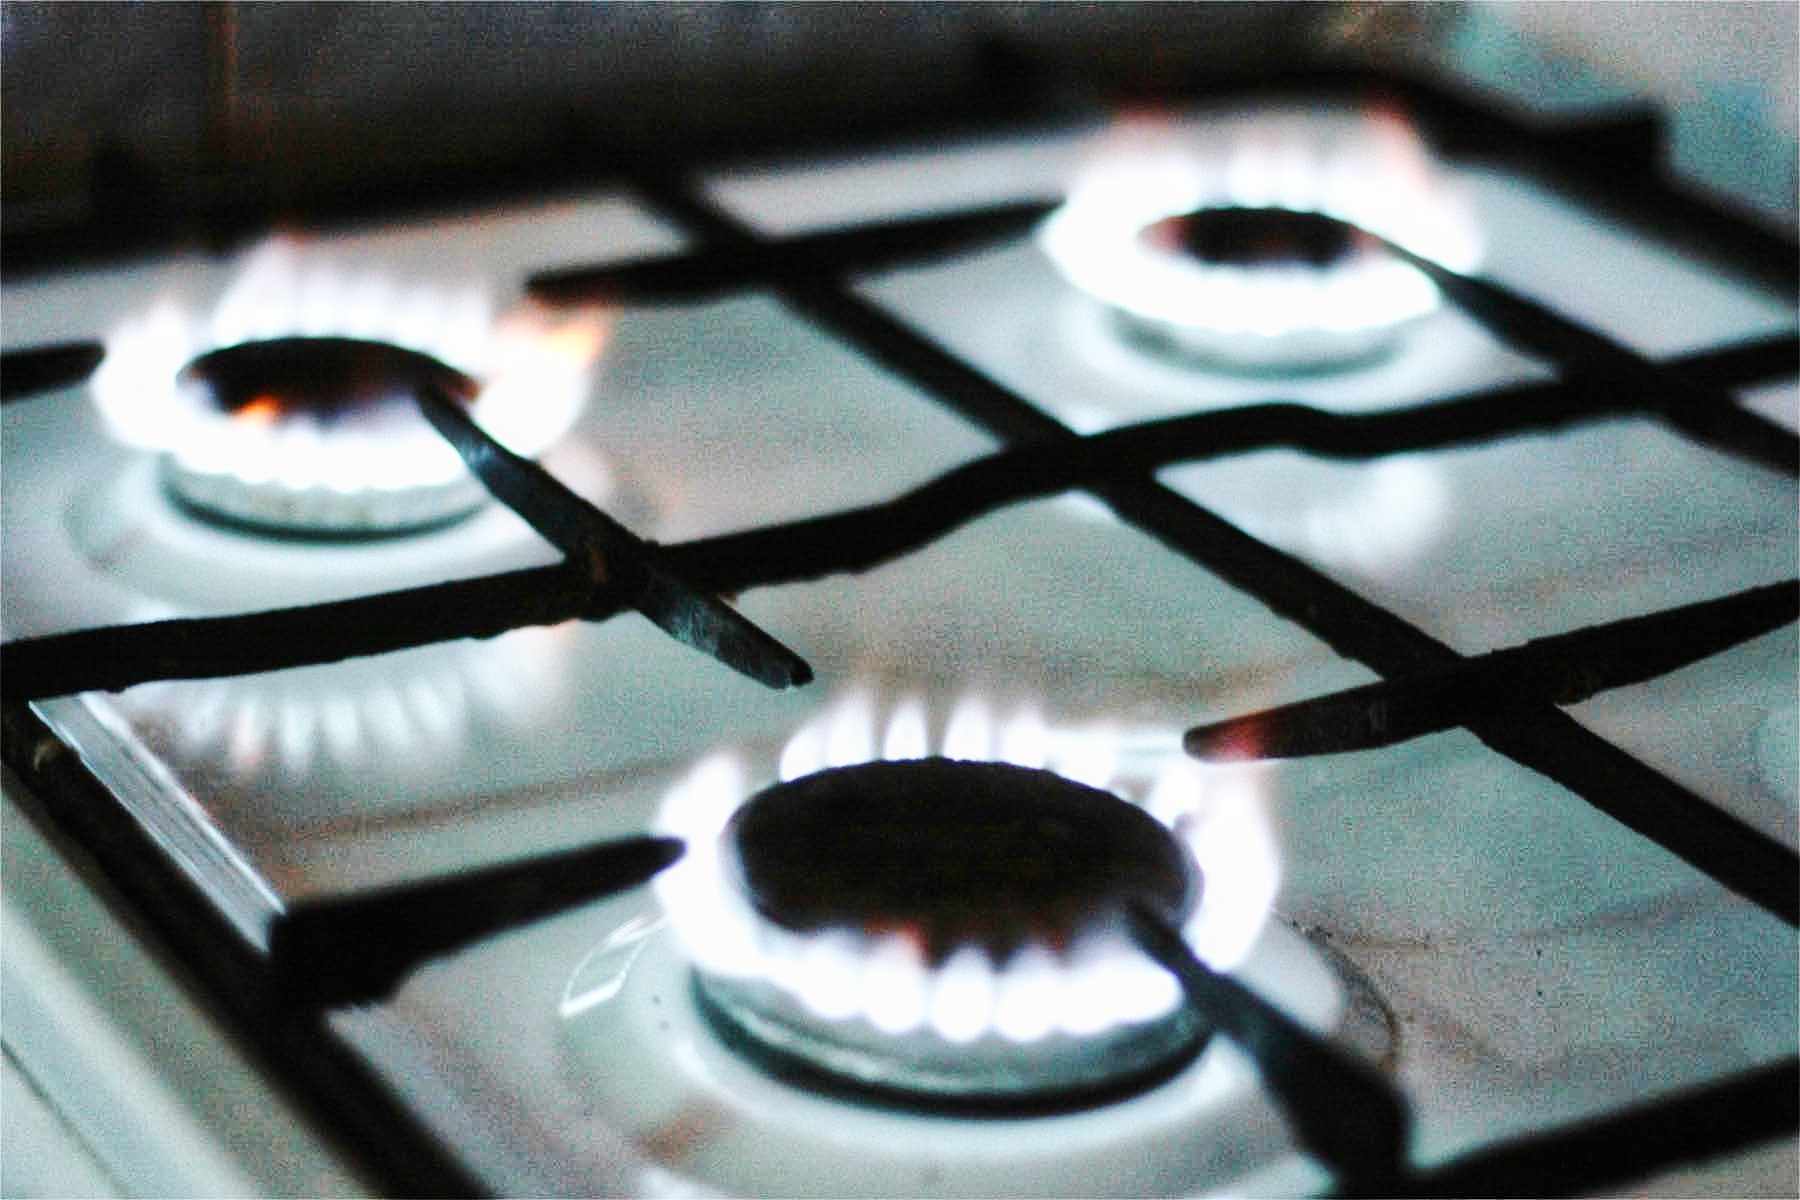 Expert Gas Stove Repair in Georgetown: Reliable solutions for all gas stove issues